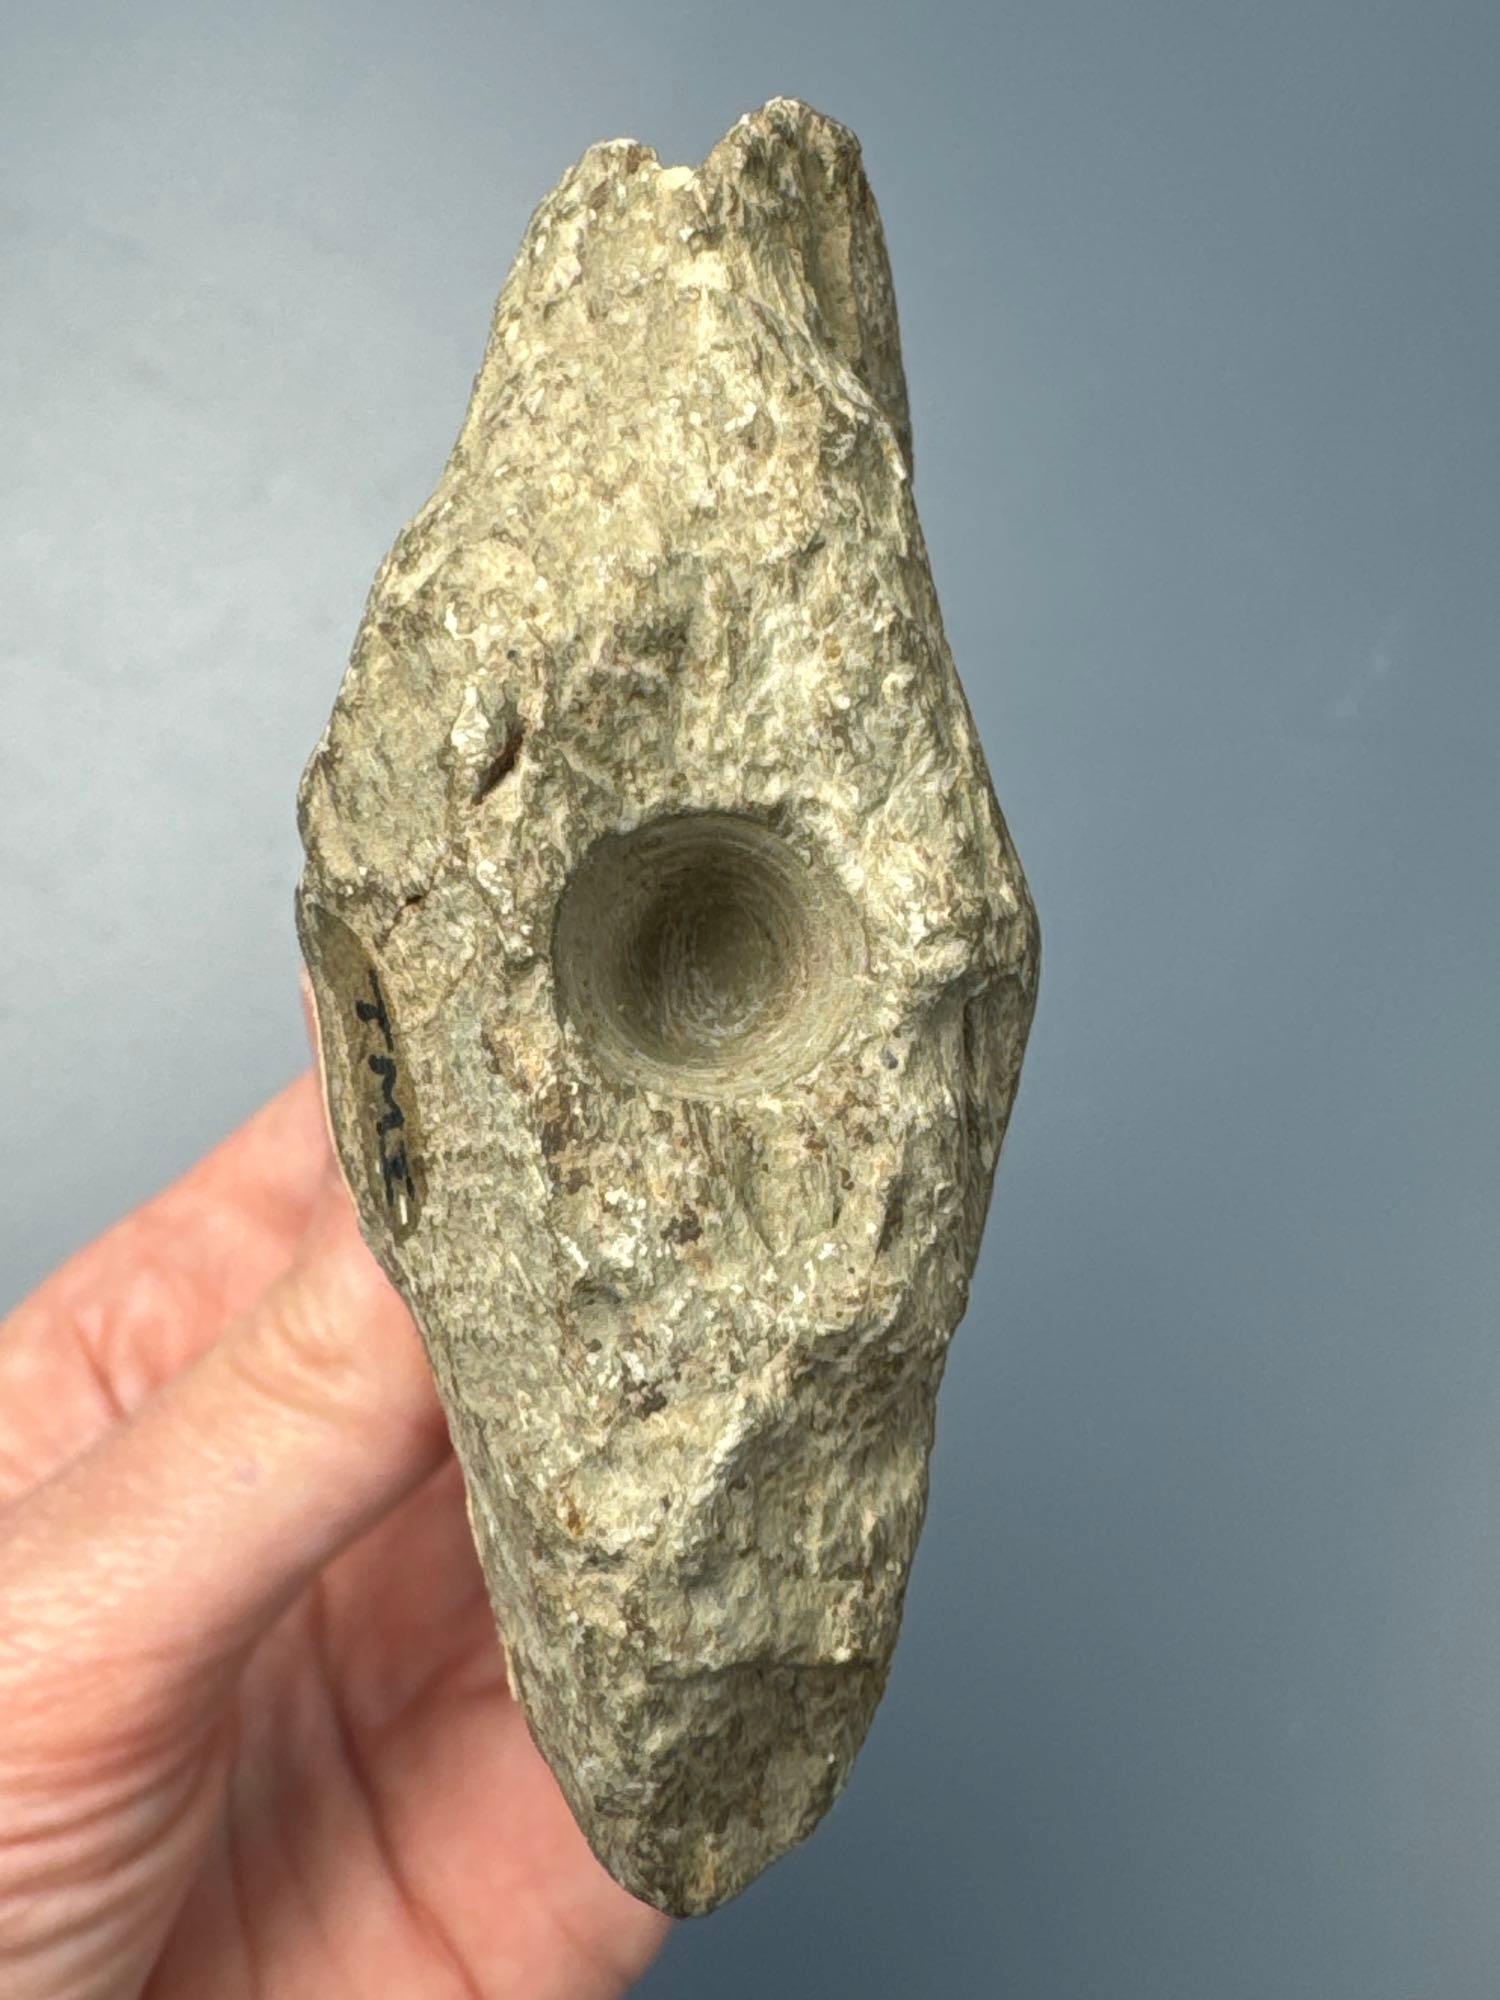 4 1/2" Shield Bannerstone Preform, Found on Three Mile Island, Dauphin Co., PA, DRILLING STARTED, Ex